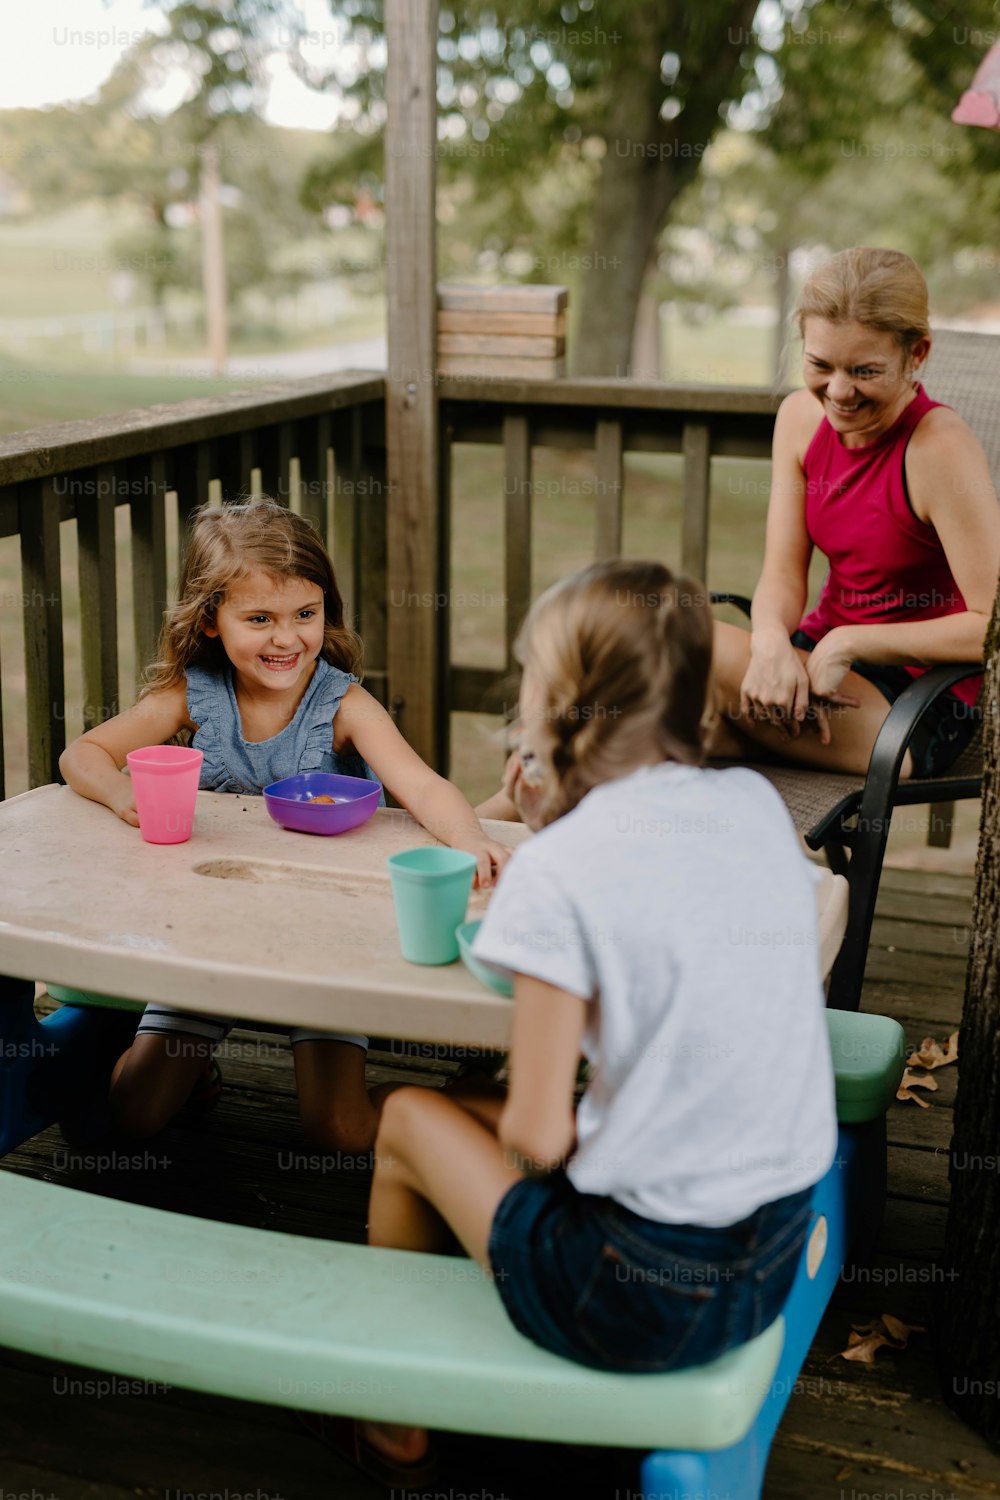 a group of children sitting around a table